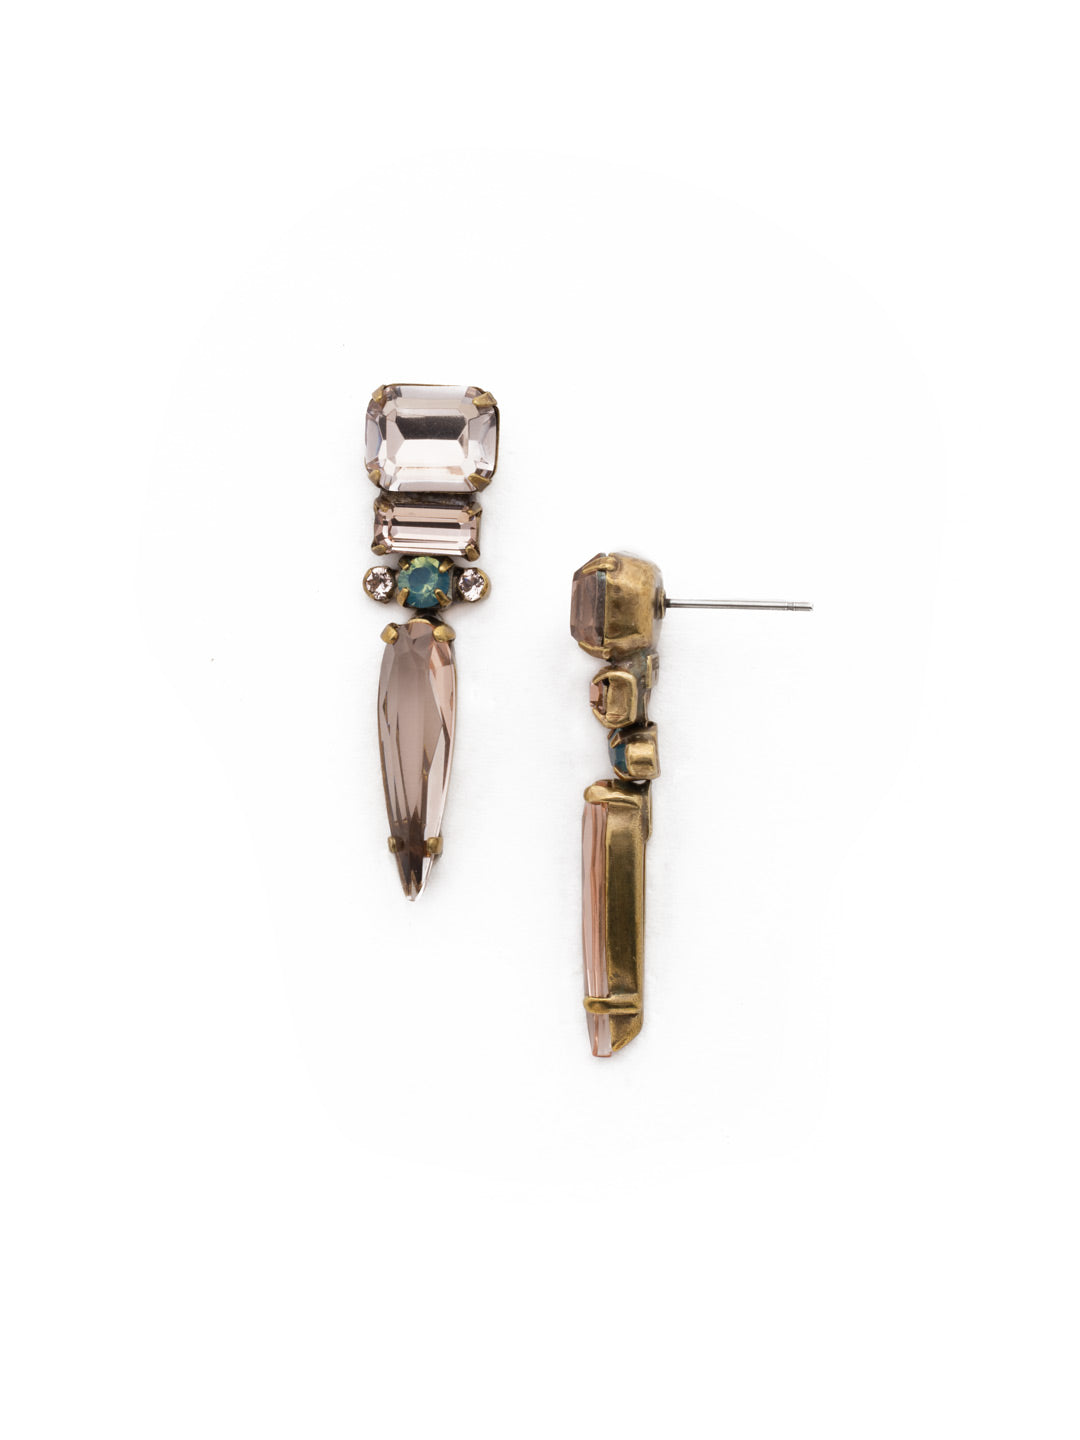 Spiked Drop Earring - EDK68AGAP - <p>These delicate french wire earrings featured a spike lying beneath two baguette crystals atop three rounded crystals. Add a subtle touch of sparkle and edge to your look with this pointed pair. From Sorrelli's Apricot Agate collection in our Antique Gold-tone finish.</p>